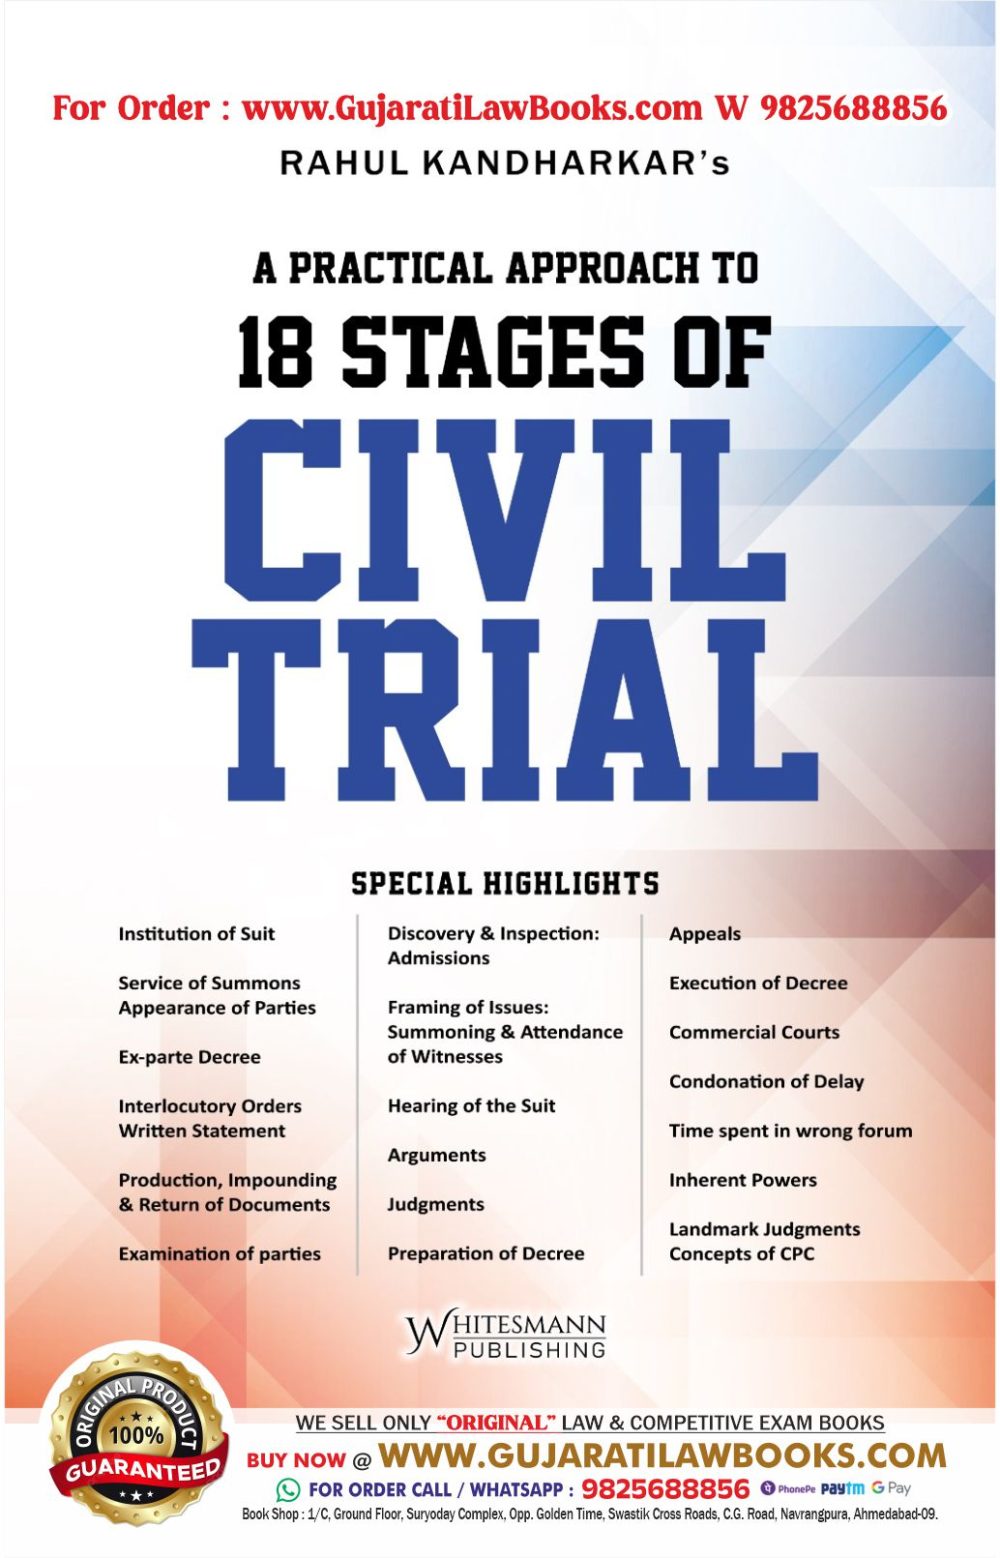 A Practical Approach to 18 Stages of CIVIL TRIAL by Rahul Kandharkar - Latest March 2024 Edition Whitesmann